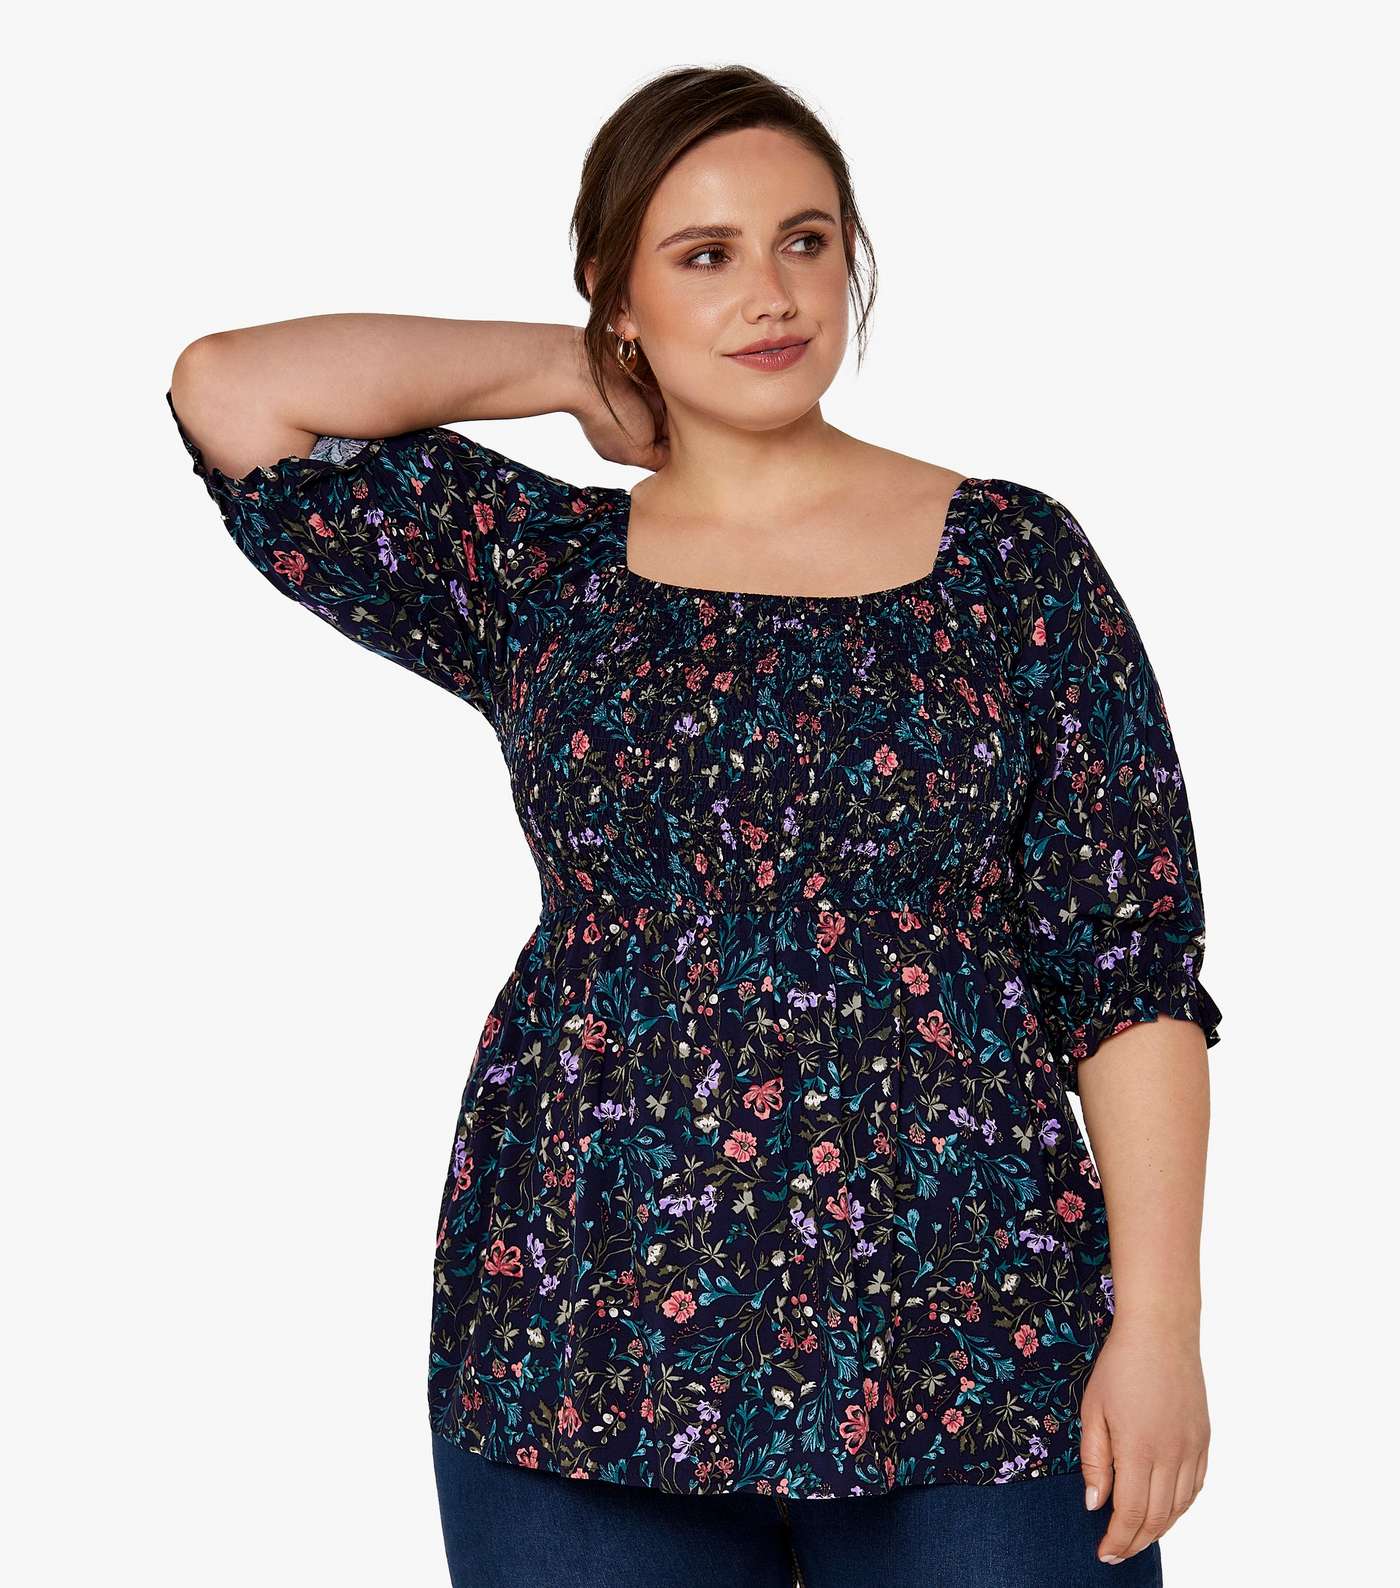 Apricot Curves Navy Floral Peplum Top Image 5